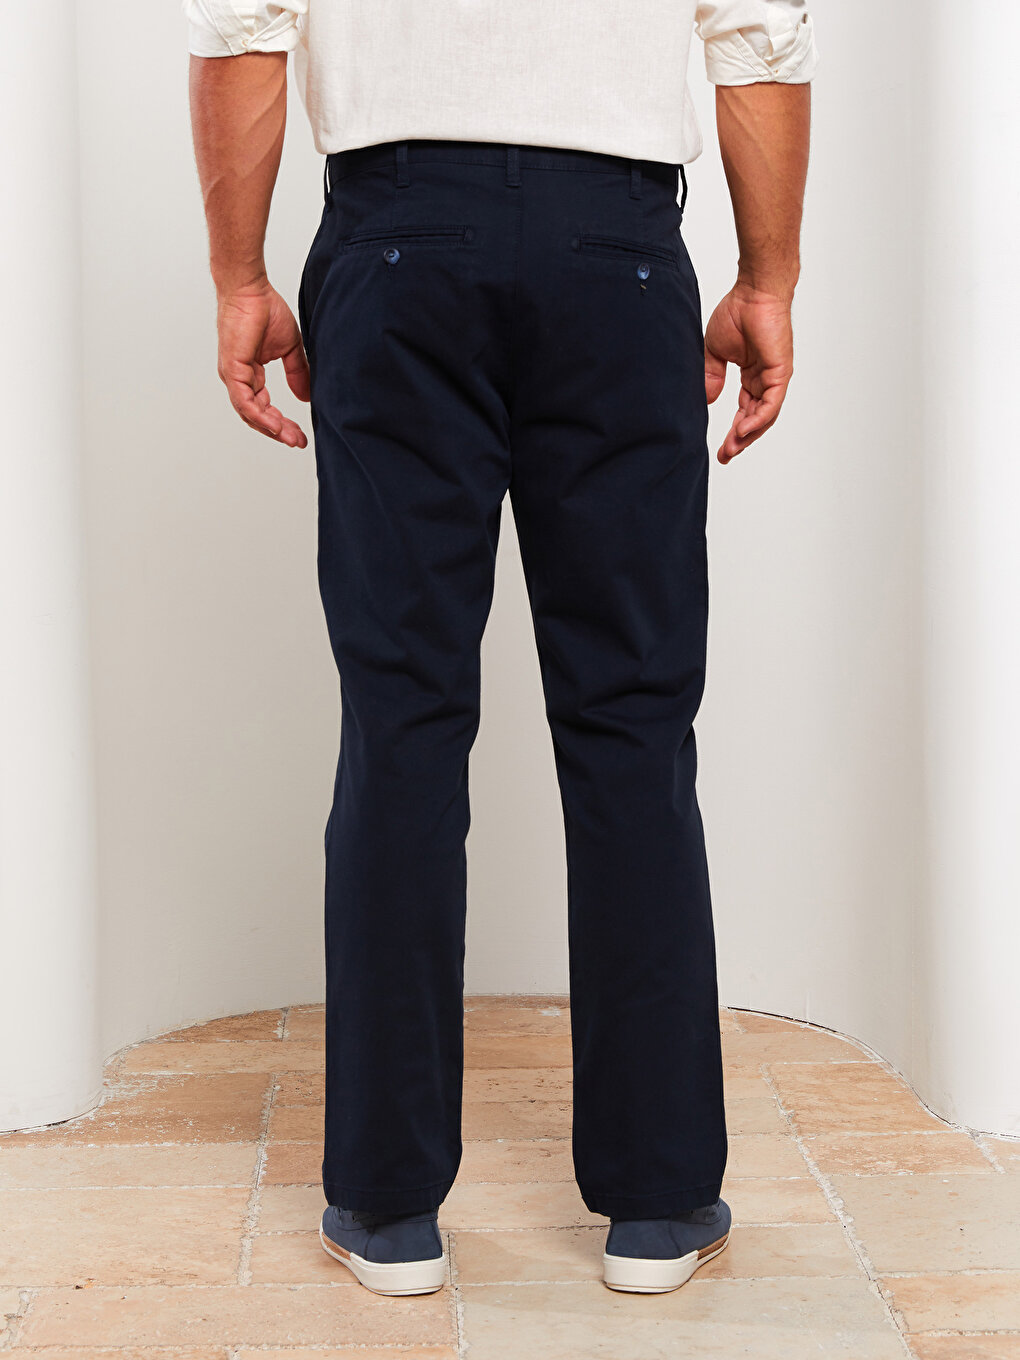 Royal Blue Flat Front Chinos | Peter Christian